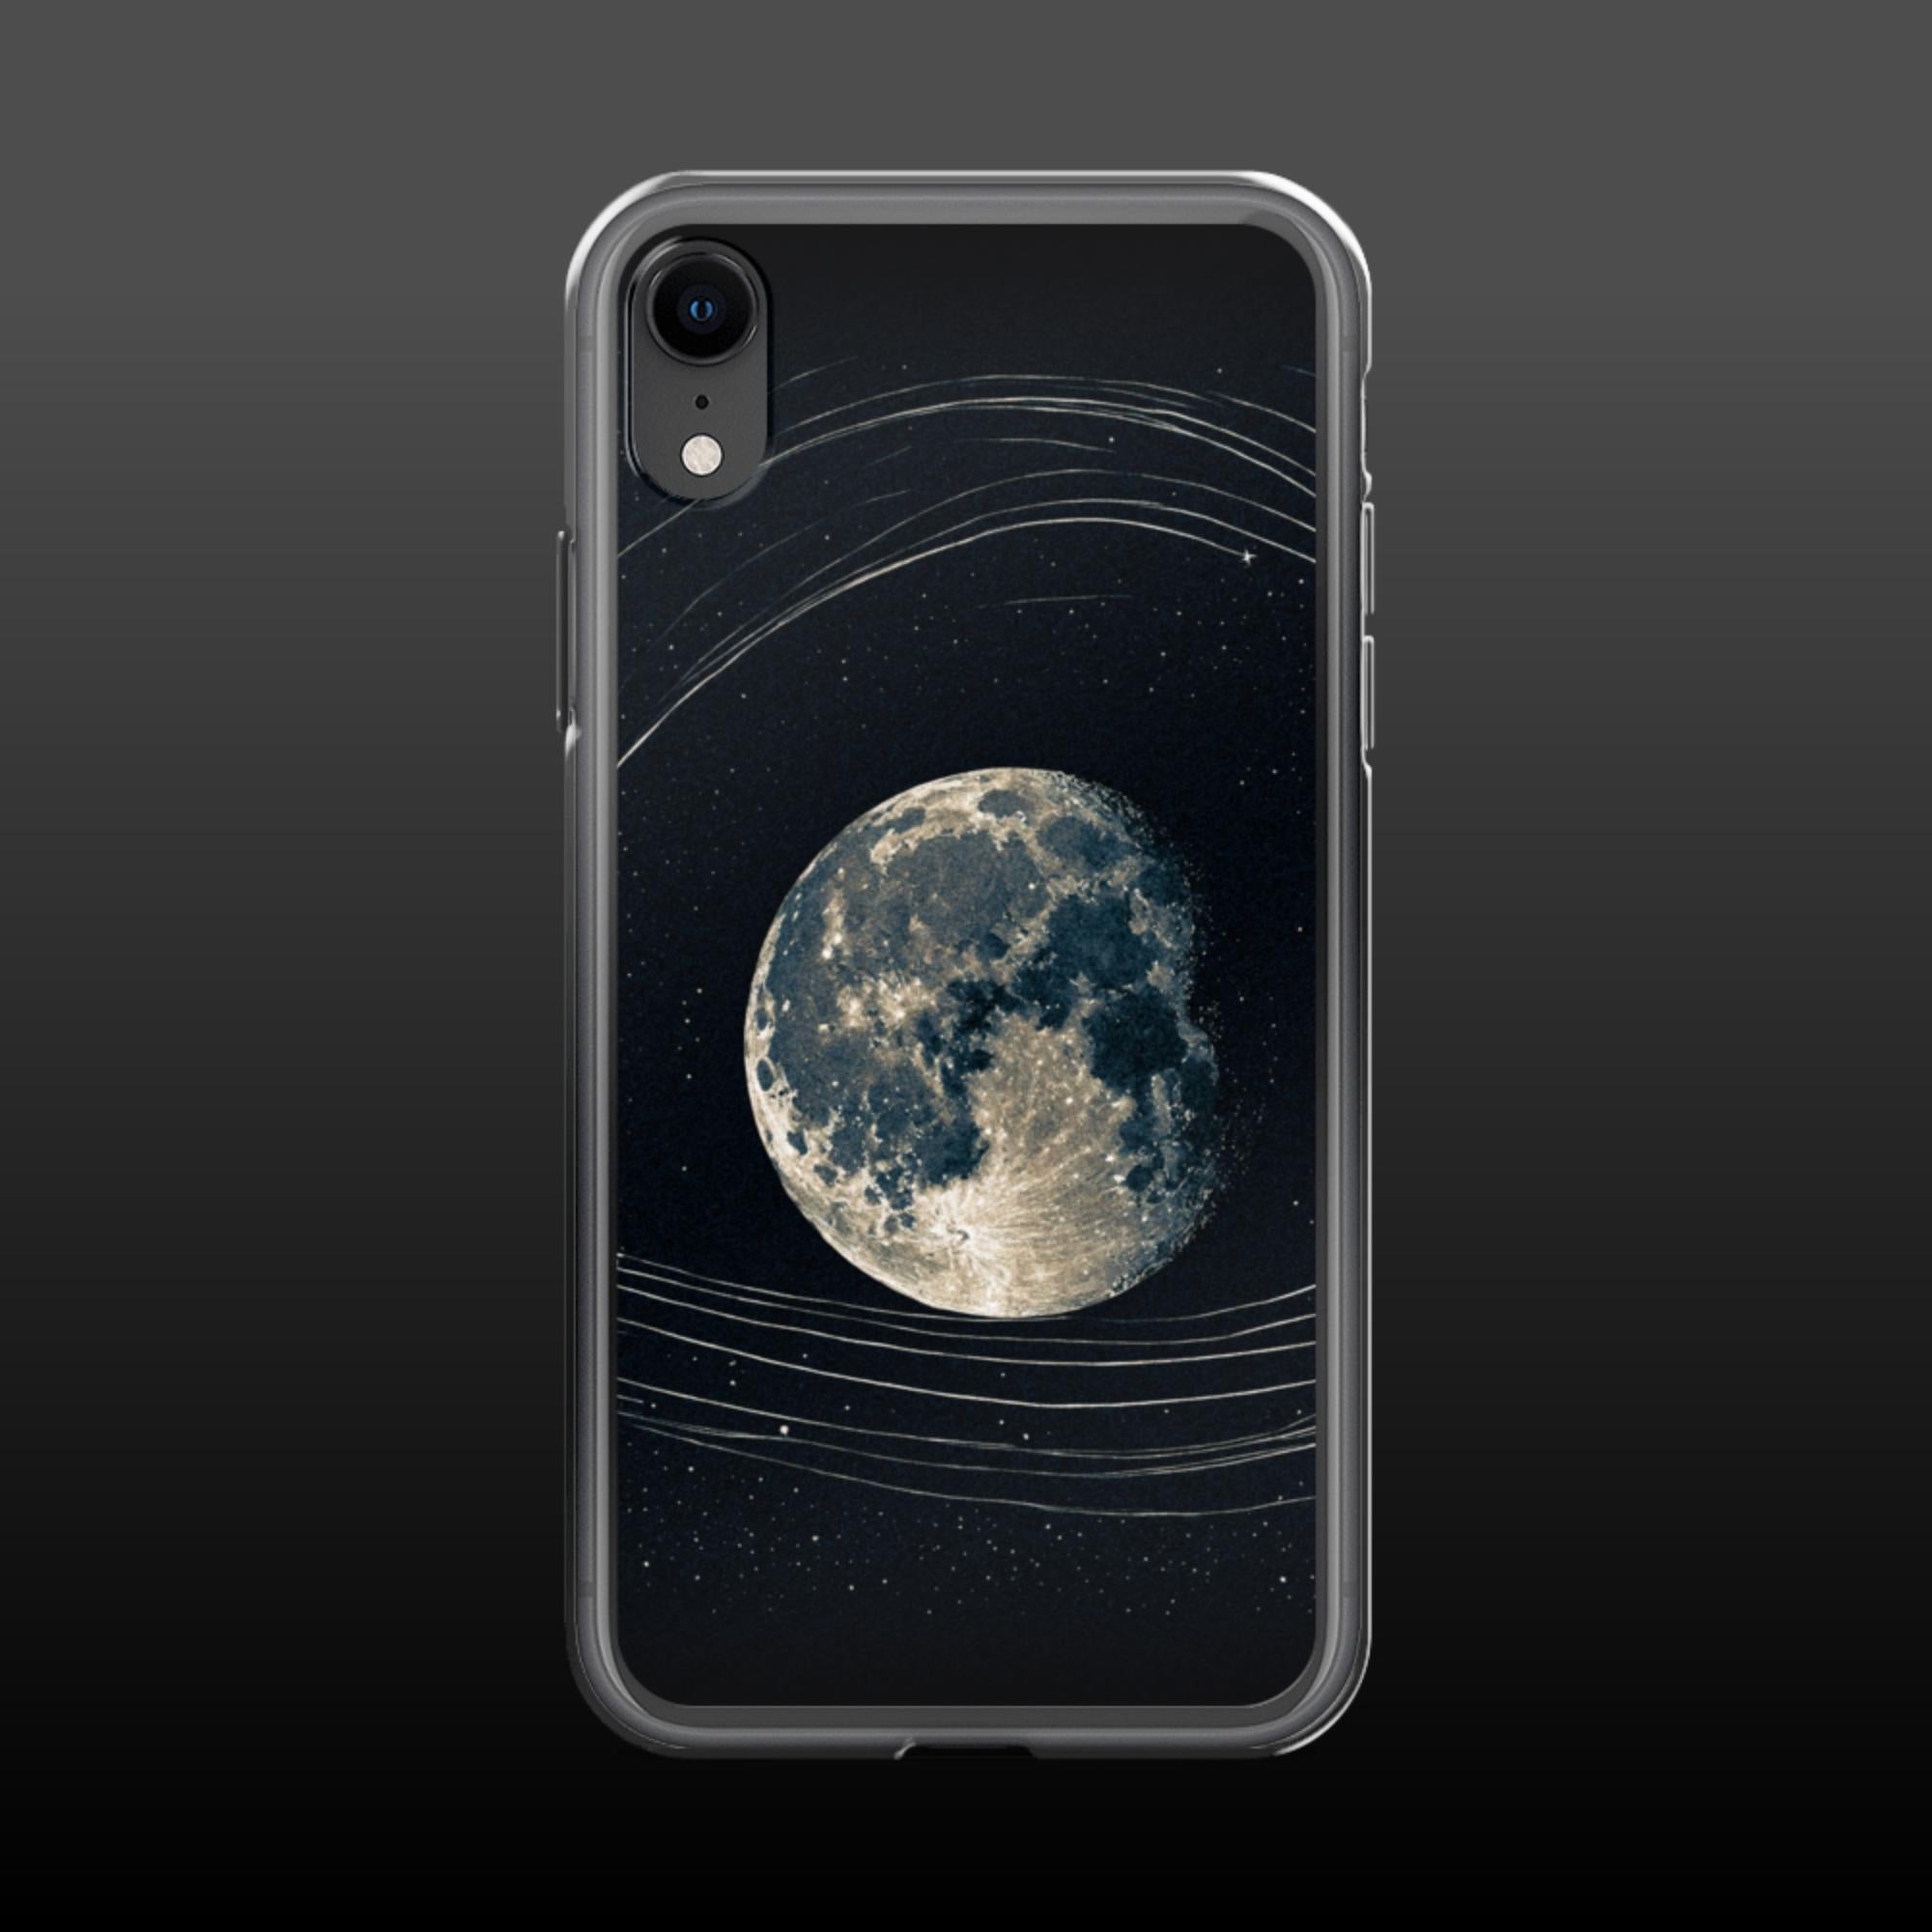 "Round the moon" clear iphone case - Clear iphone case - Ever colorful